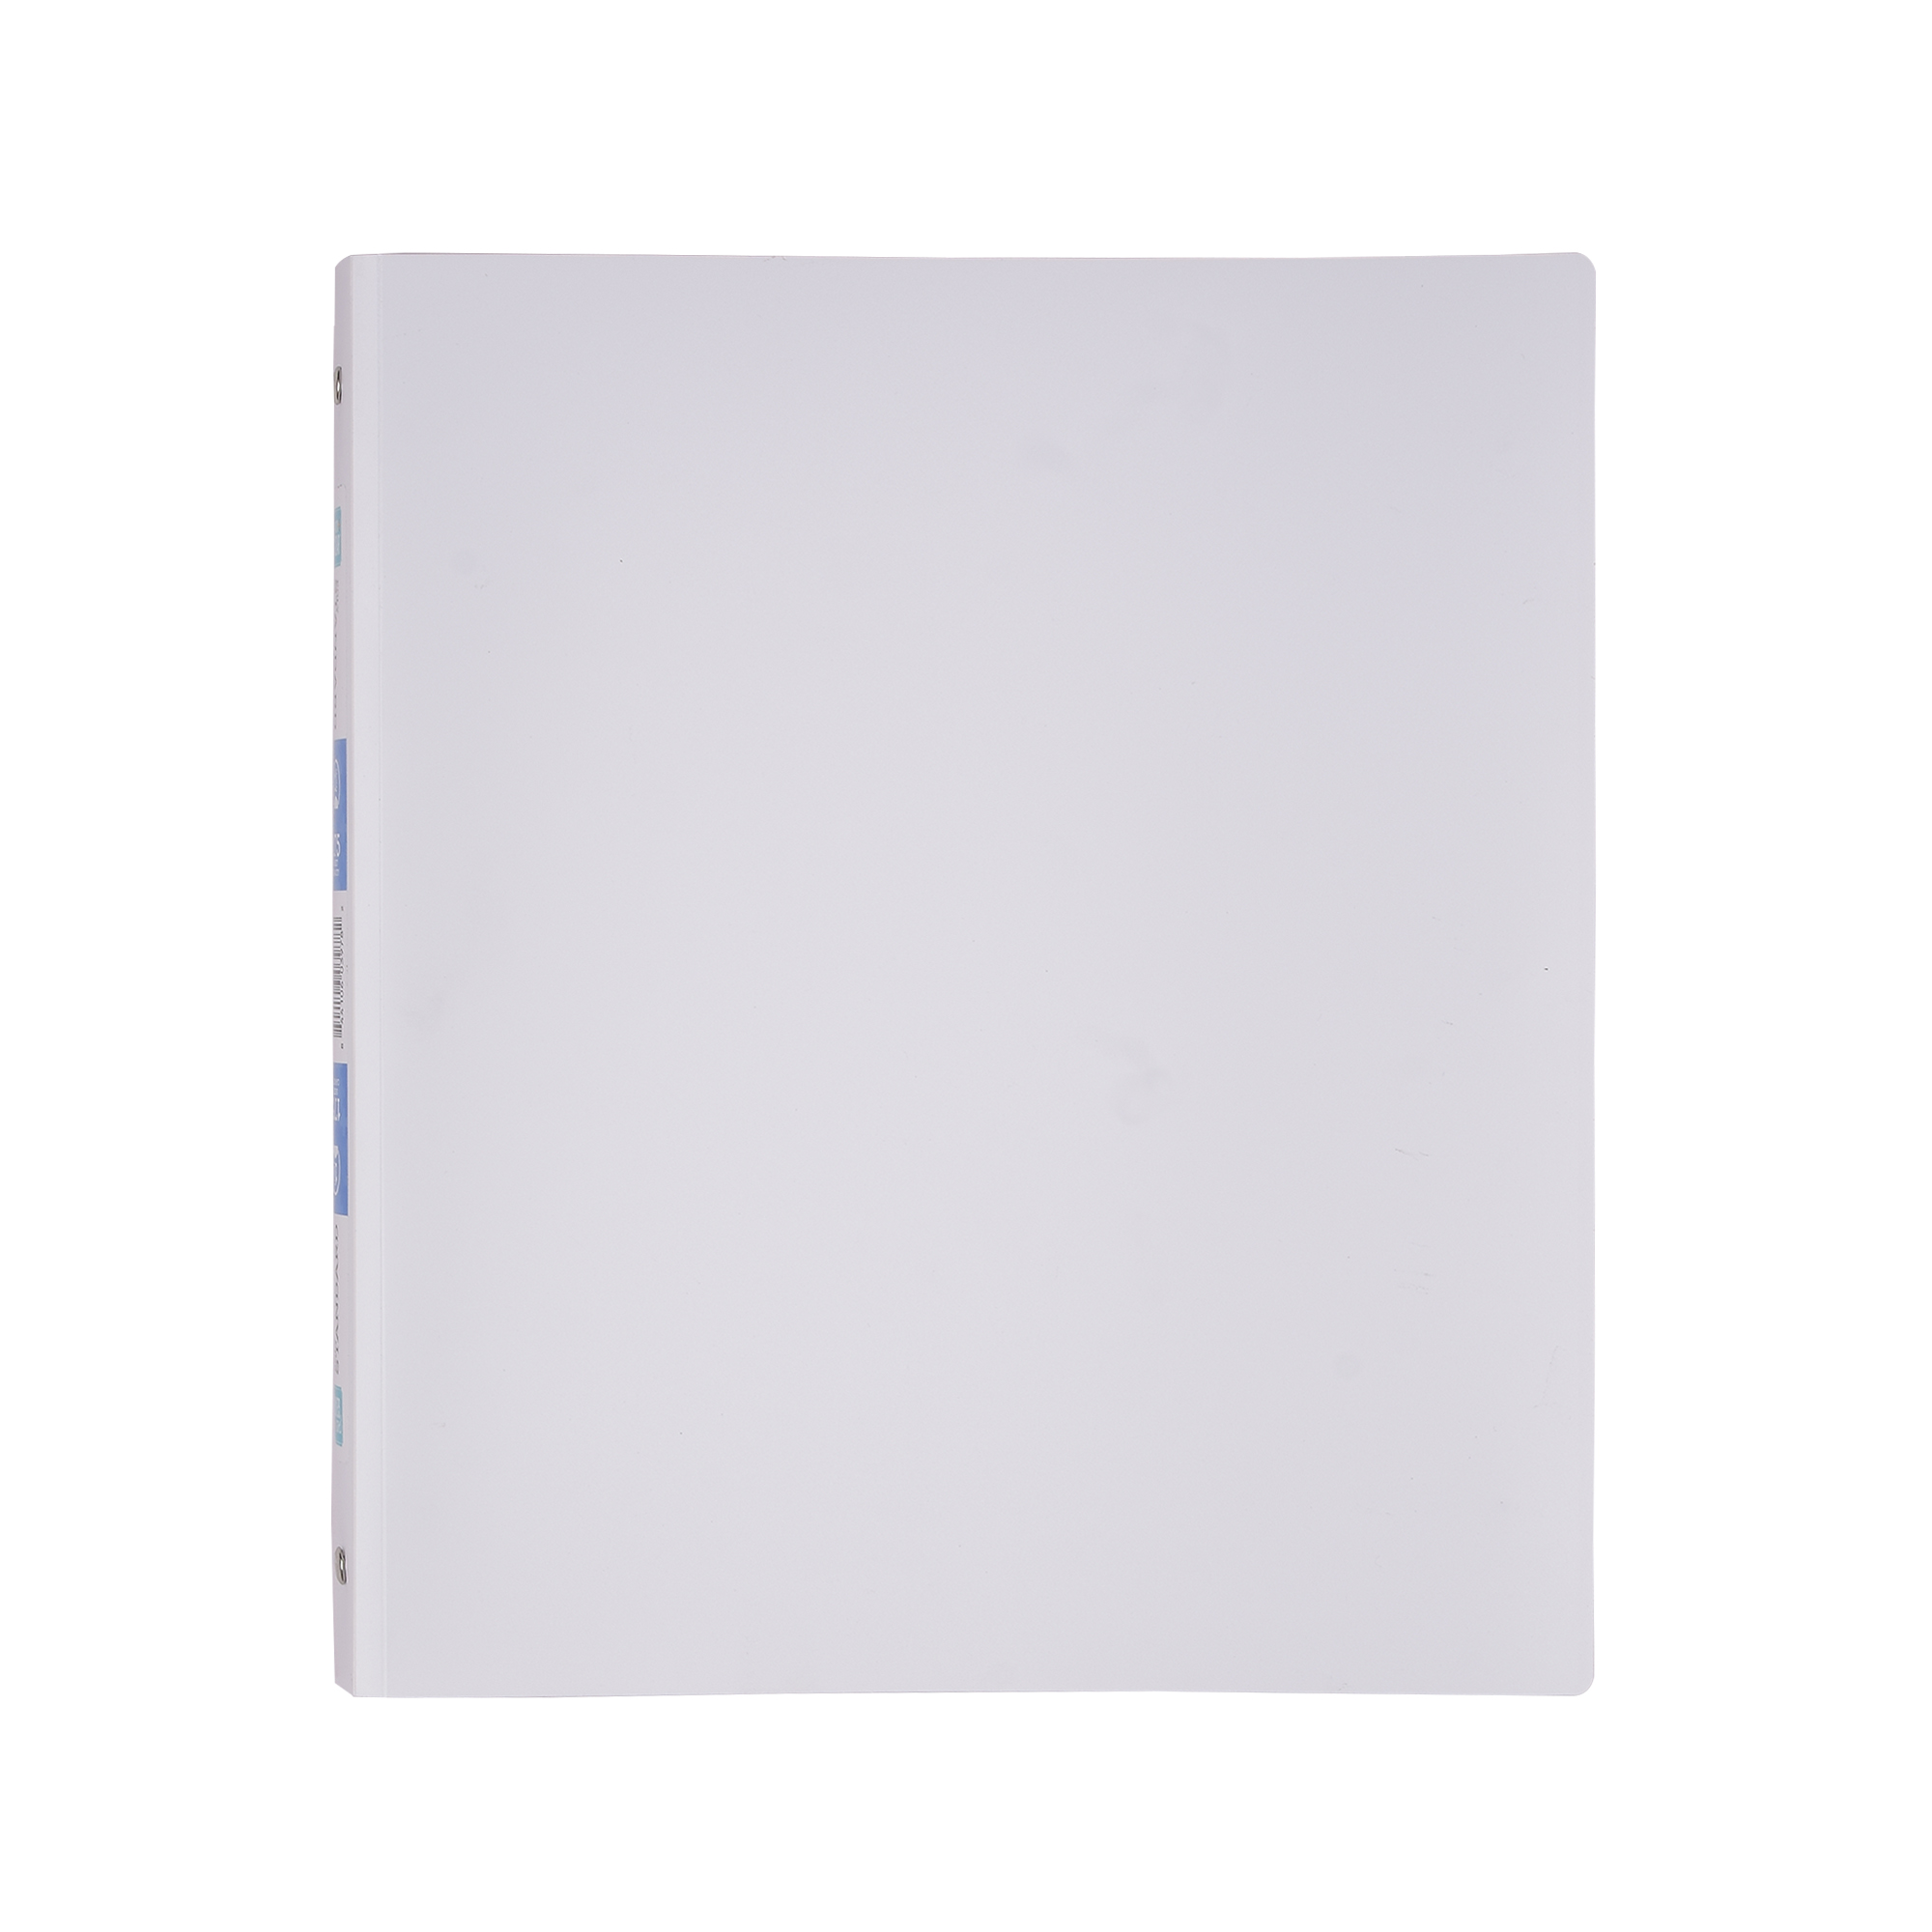 Pen + Gear 1" Standard 3-Ring Poly Binder, White Color, 1 inch "O Ring", Letter Size - image 2 of 5